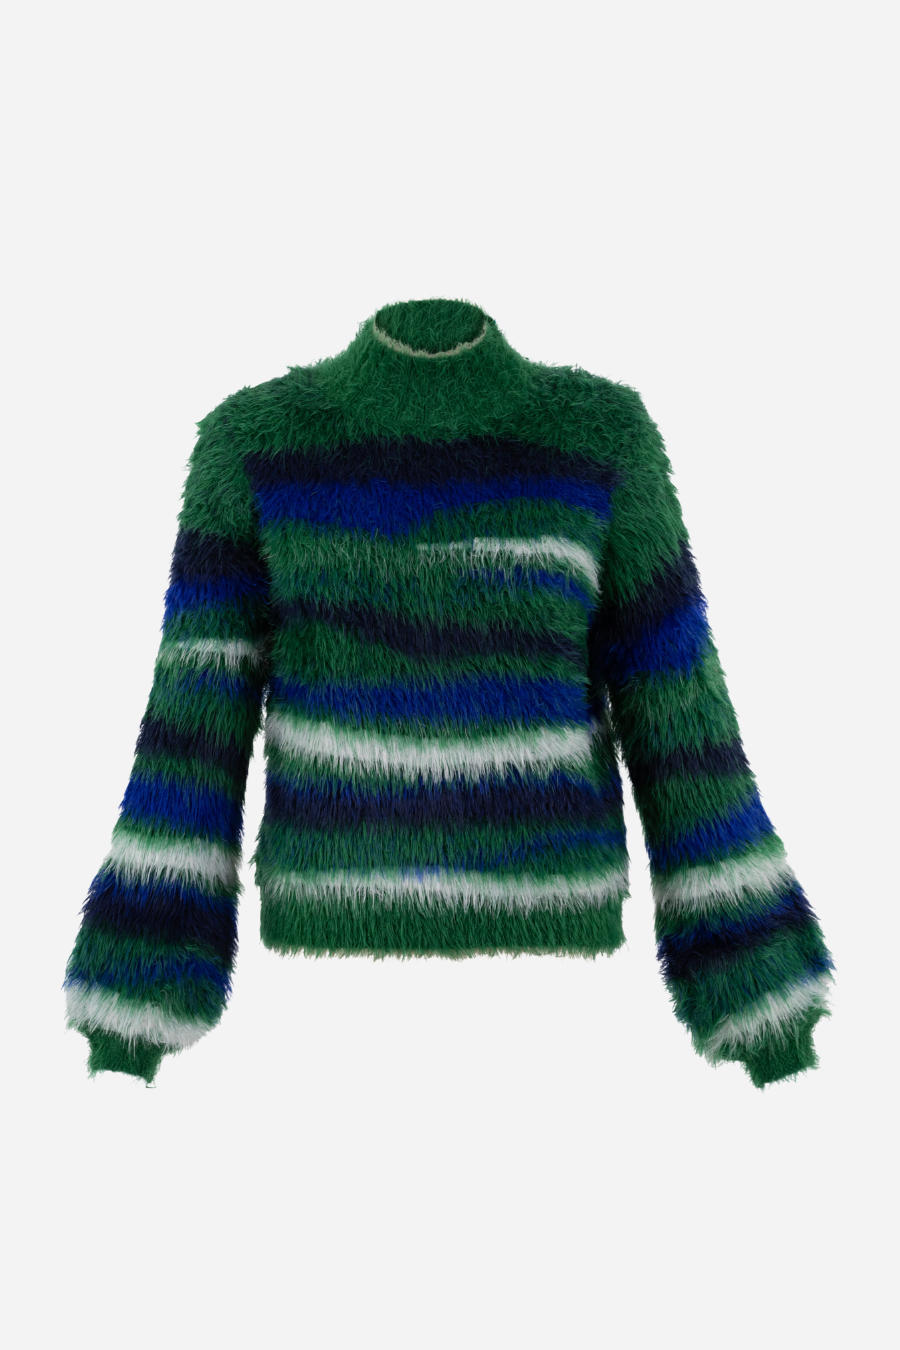 Feather Yarn Sweater ONLINE ONLY